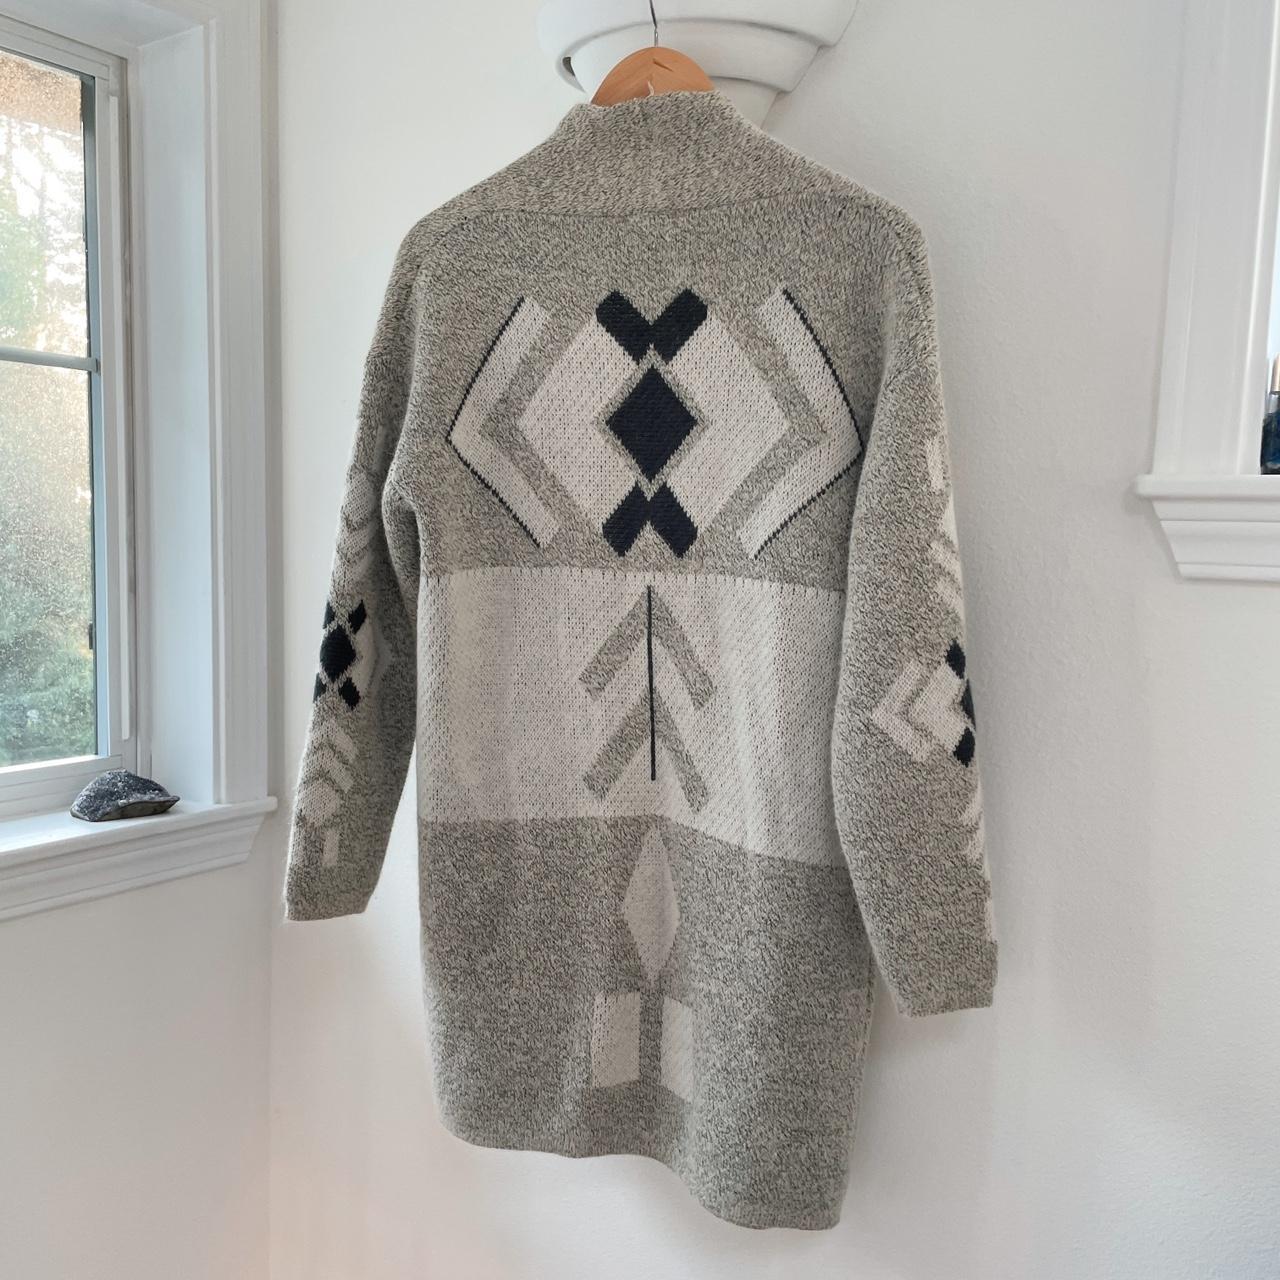 Product Image 3 - printed wrap sweater, grey, white